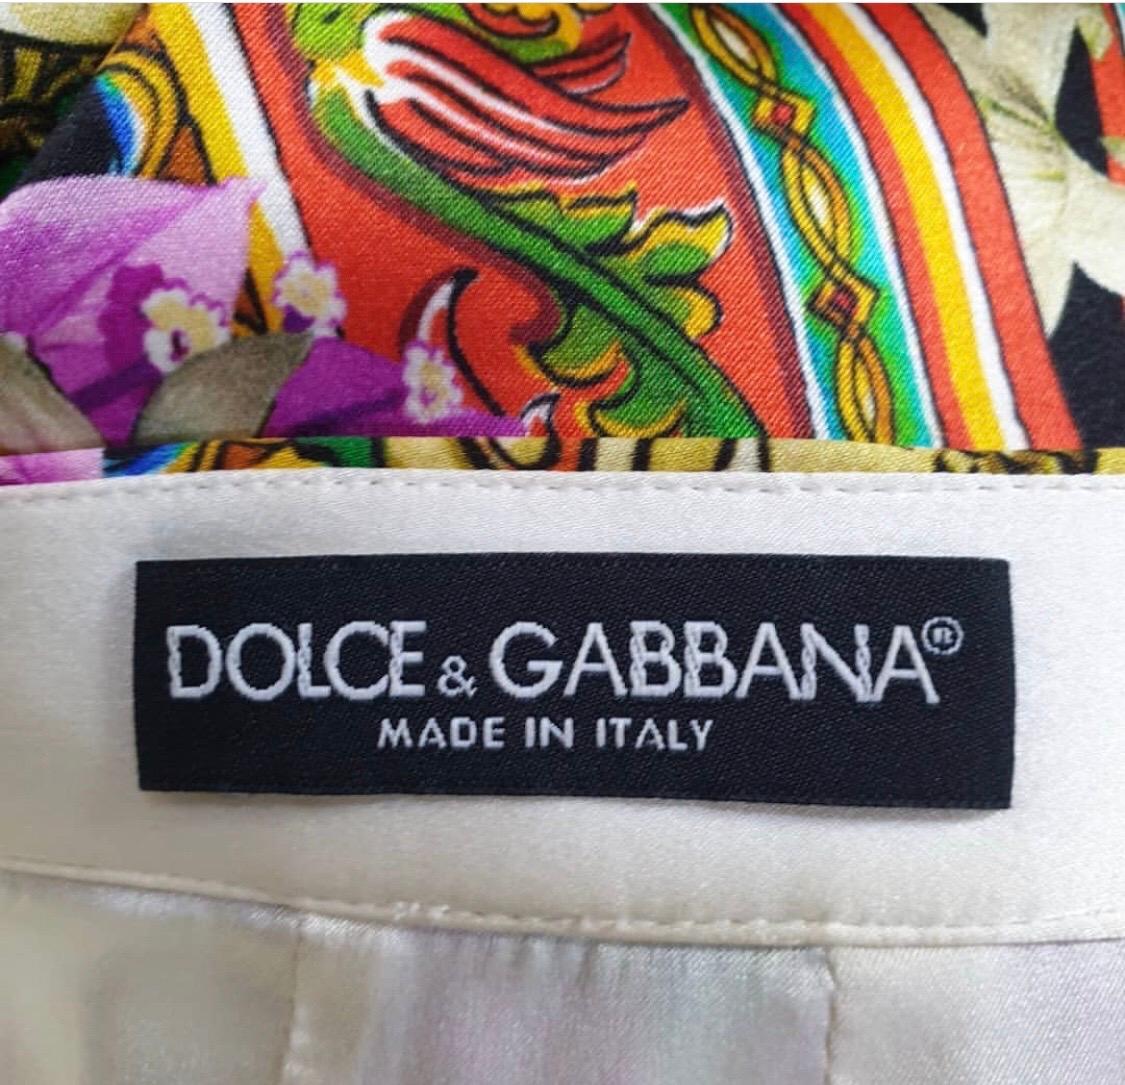 Dolce and Gabbana Carretto Floral Print Pleated Skirt Set Suit 2